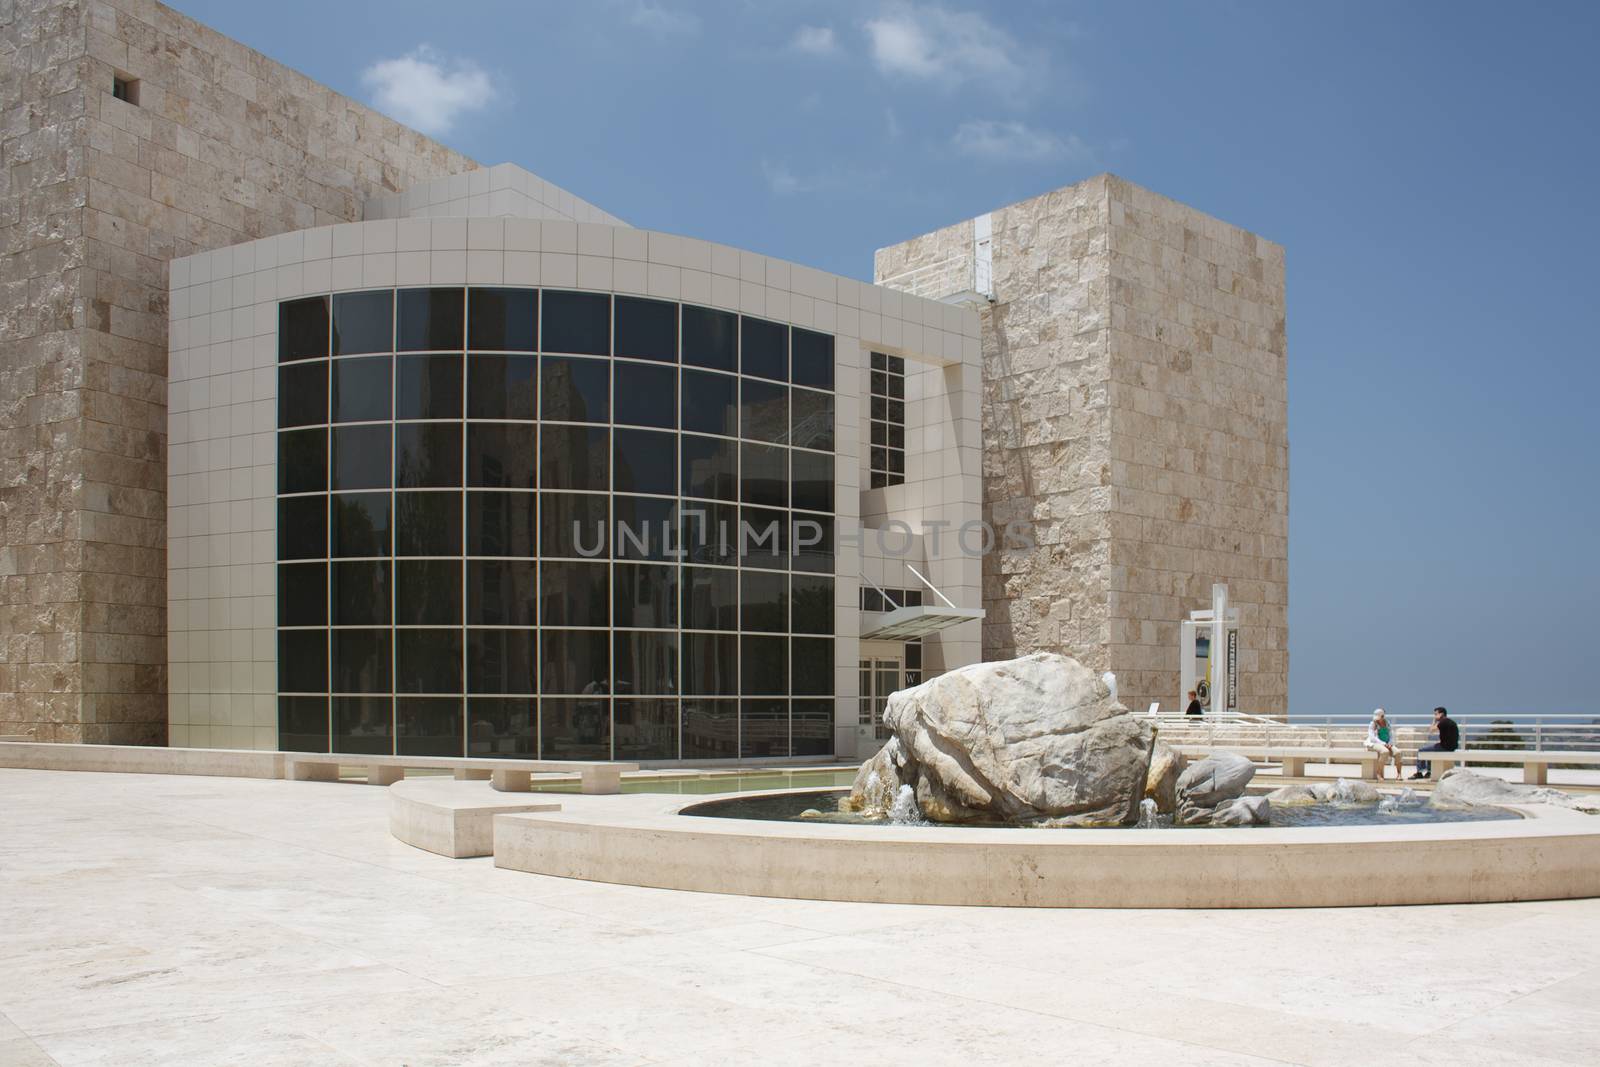 LOS ANGELES, USA - JUNE 4, 2009: The Getty Center museum in Los Angeles California USA was designed by architect Richard Meier in 1997